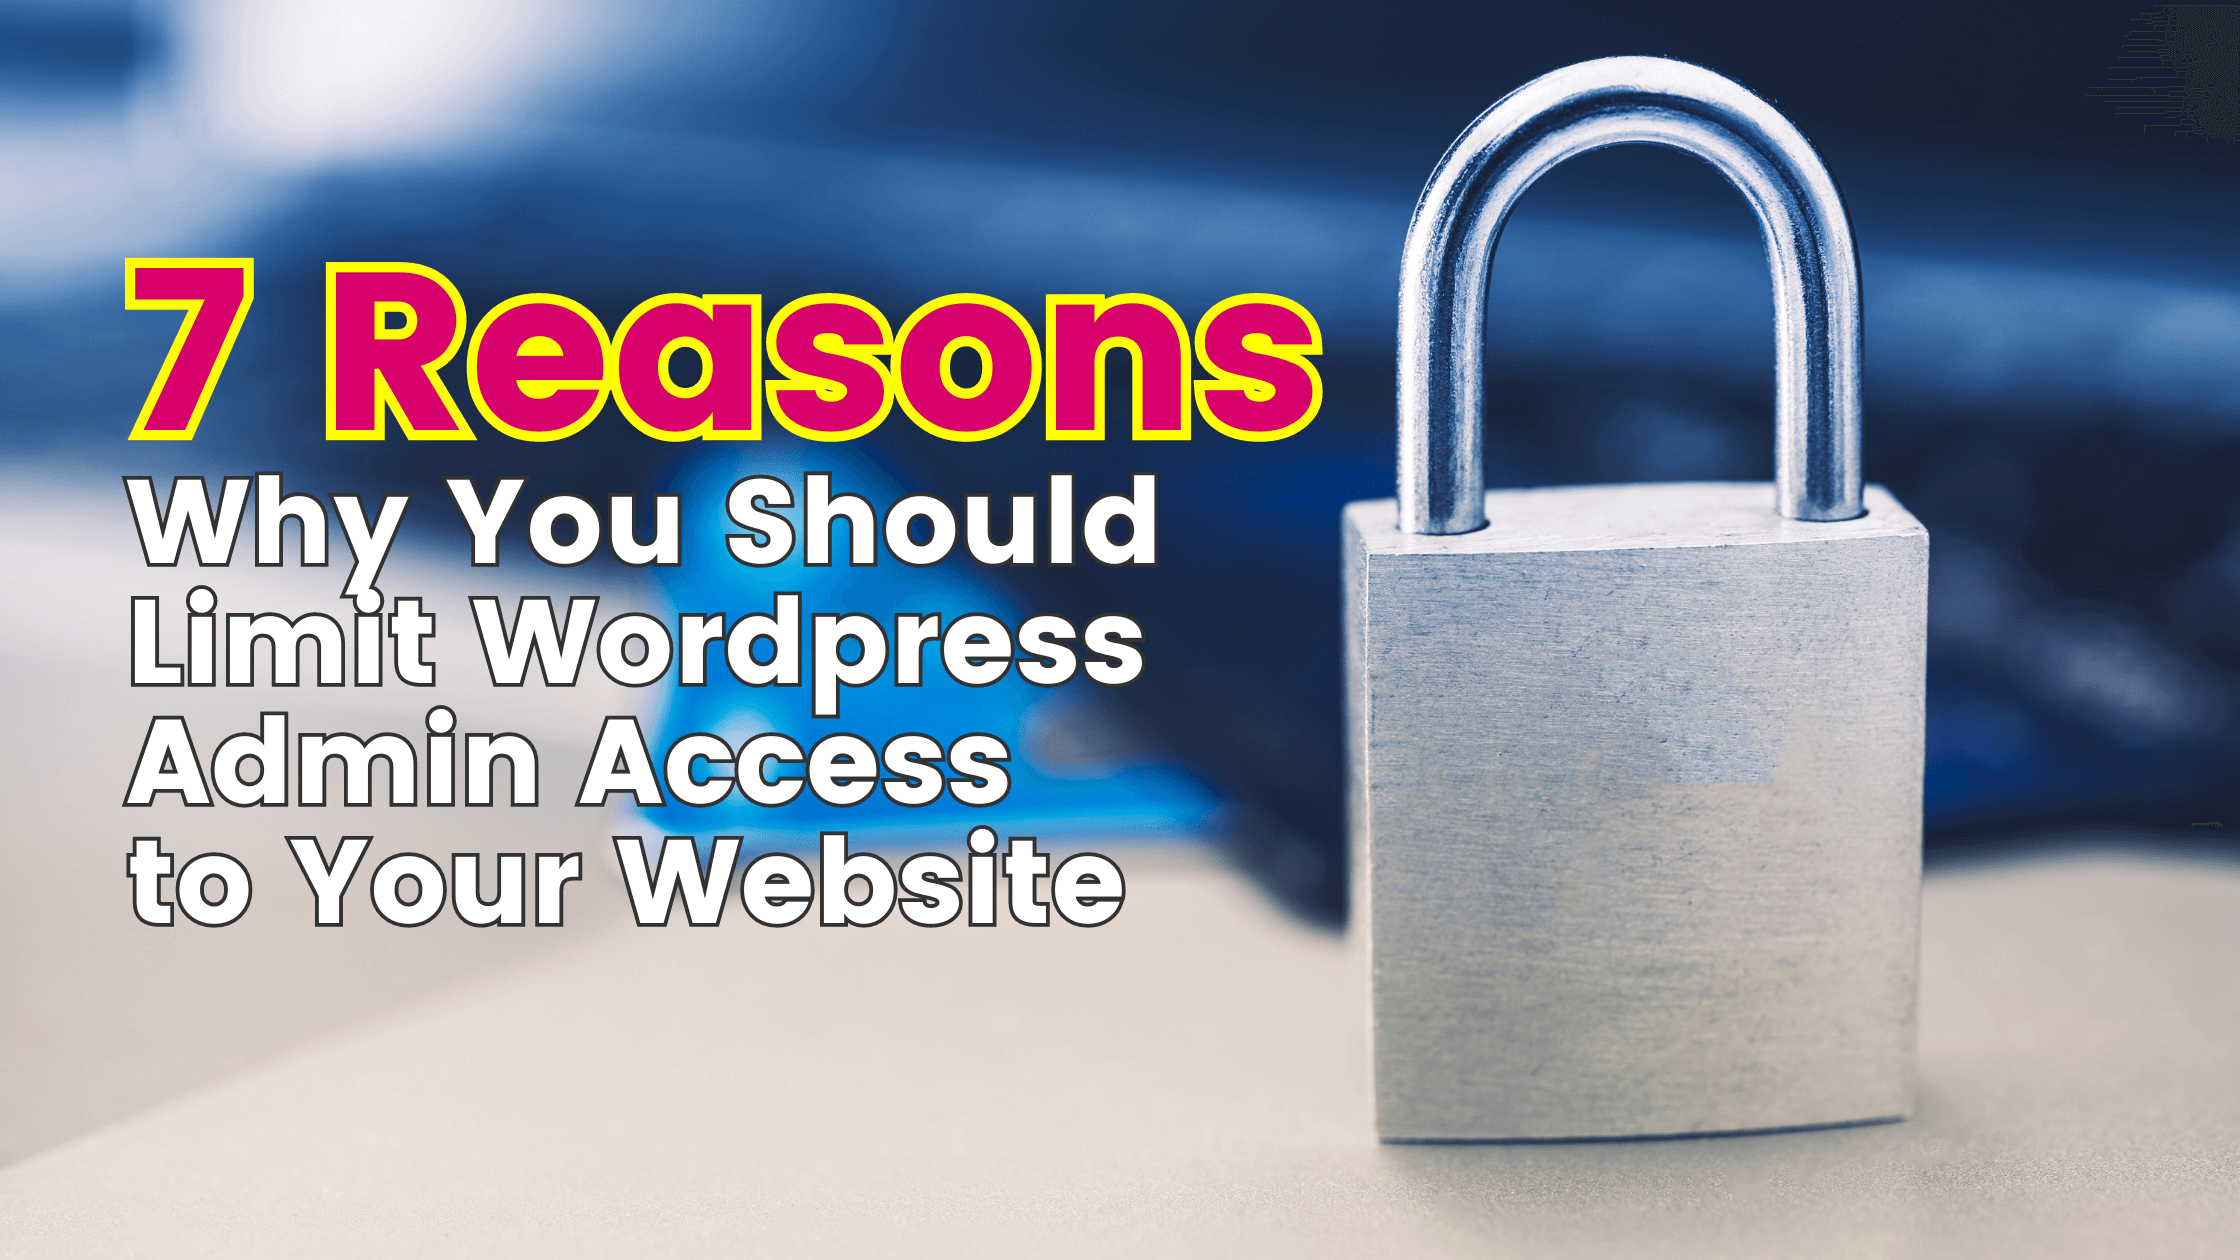 '7 Reasons Why You Should Limit Wordpress Admin Access to Your Website' with lock in image on right